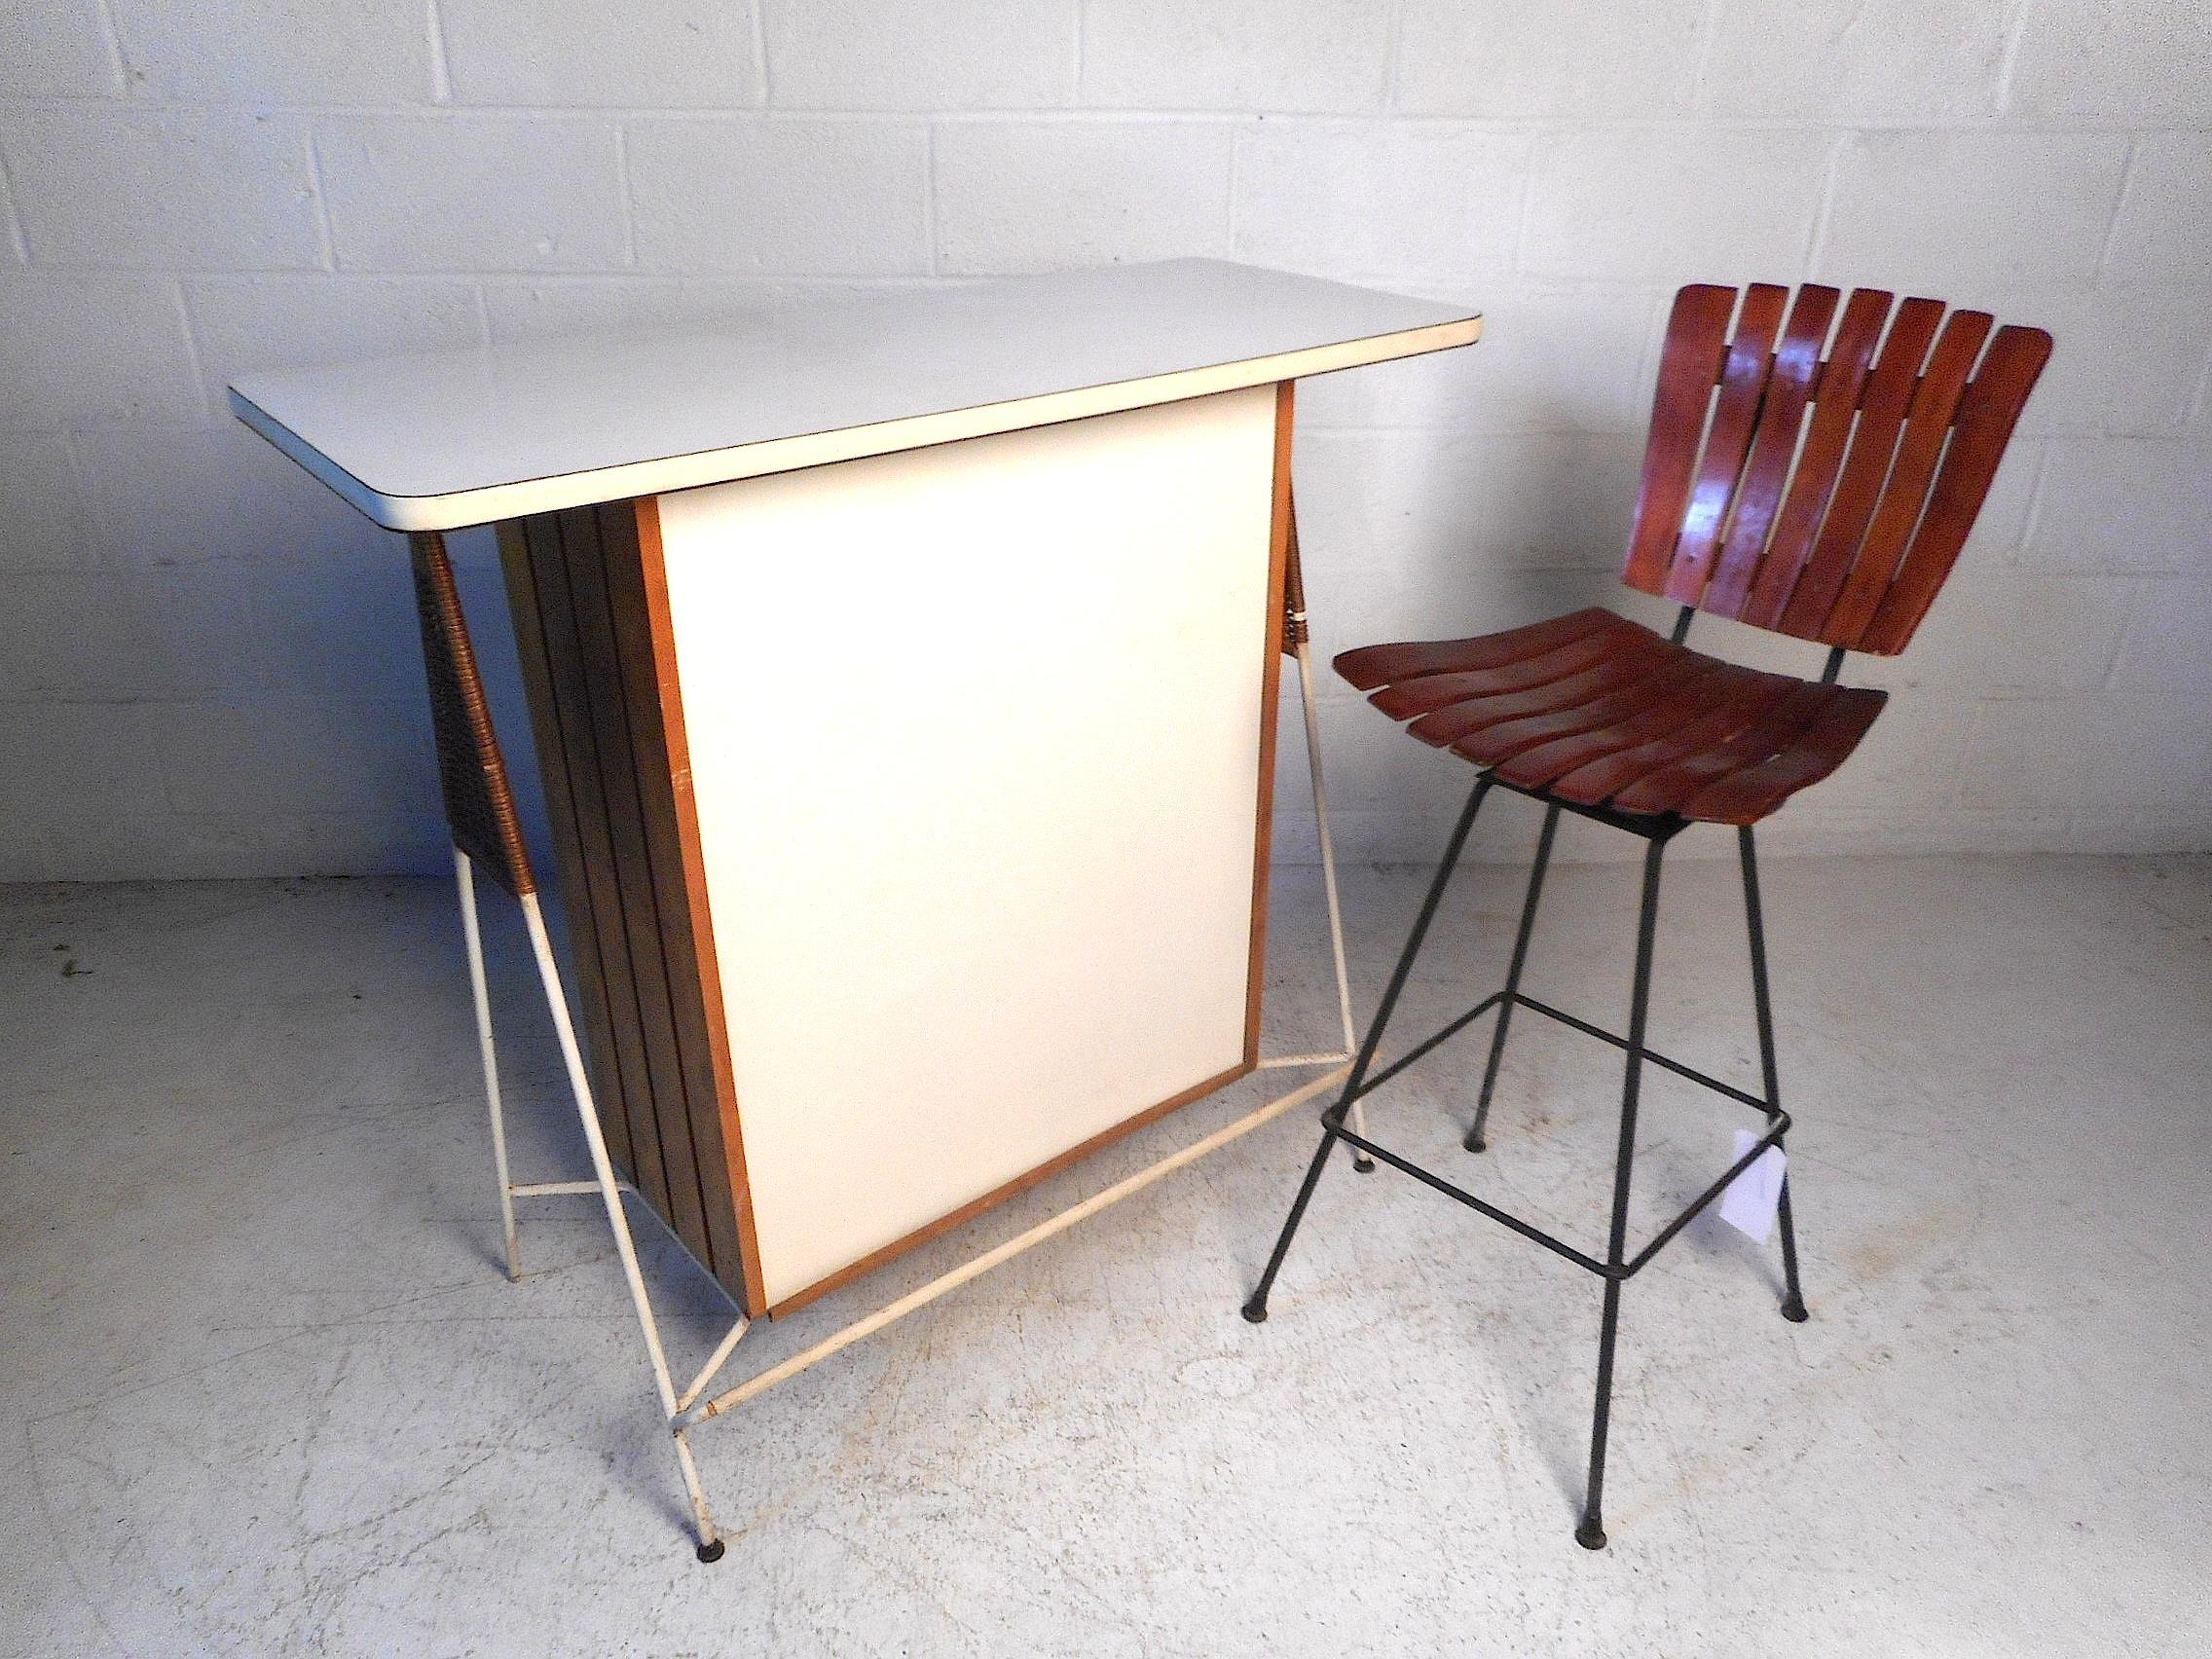 This stylish midcentury bar by Arthur Umanoff features a sleek metal frame, white laminate tabletop and front, and unusual wicker accents on the sides. Sure to impress in any home, office, or business' modern interior. Circa 1960's. Stool not